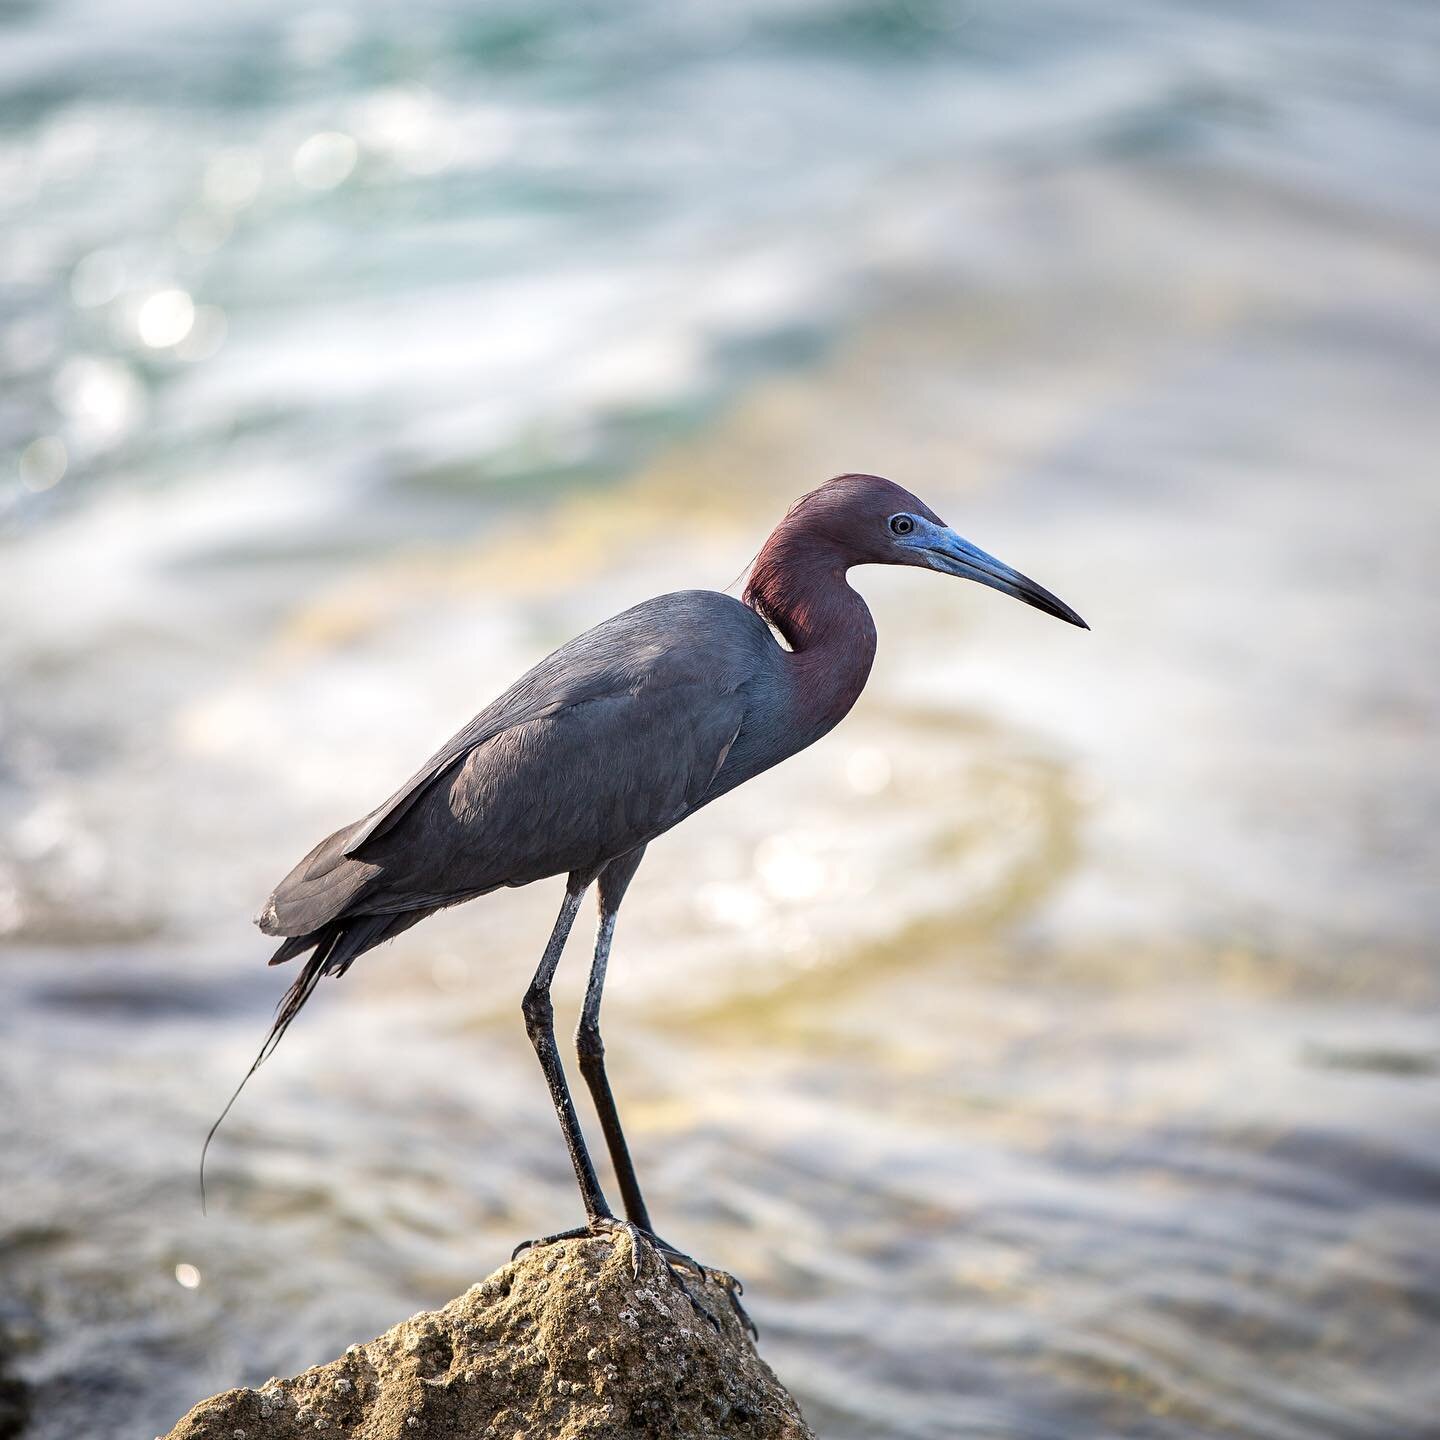 This #littleblueheron was enjoying the inlet this evening as much as the people were.

#discoverjupiterfl